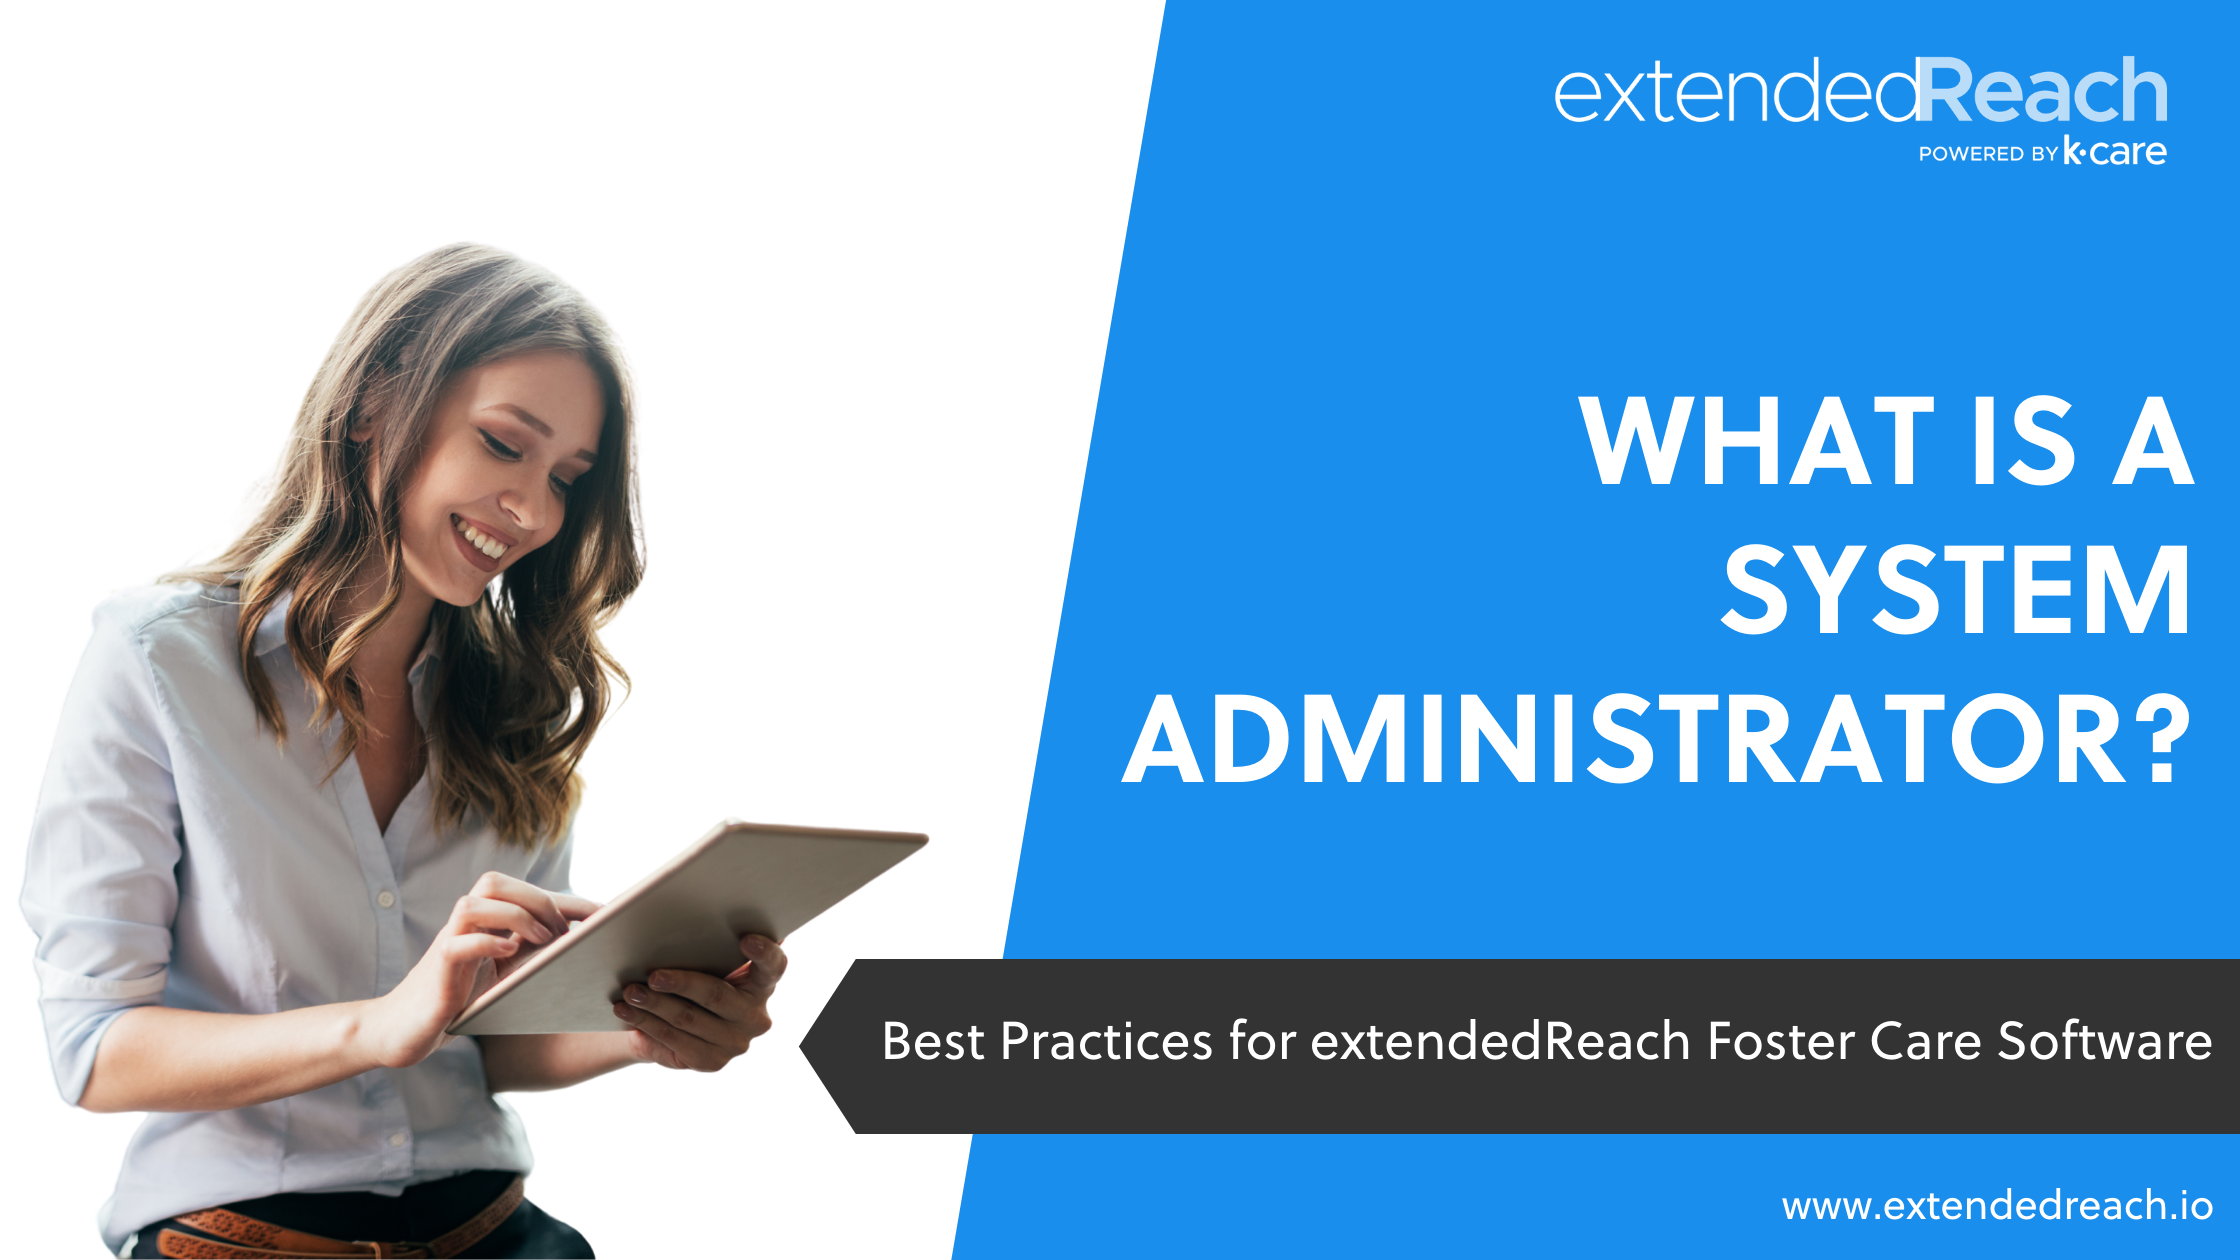 Best Practices for extendedReach software